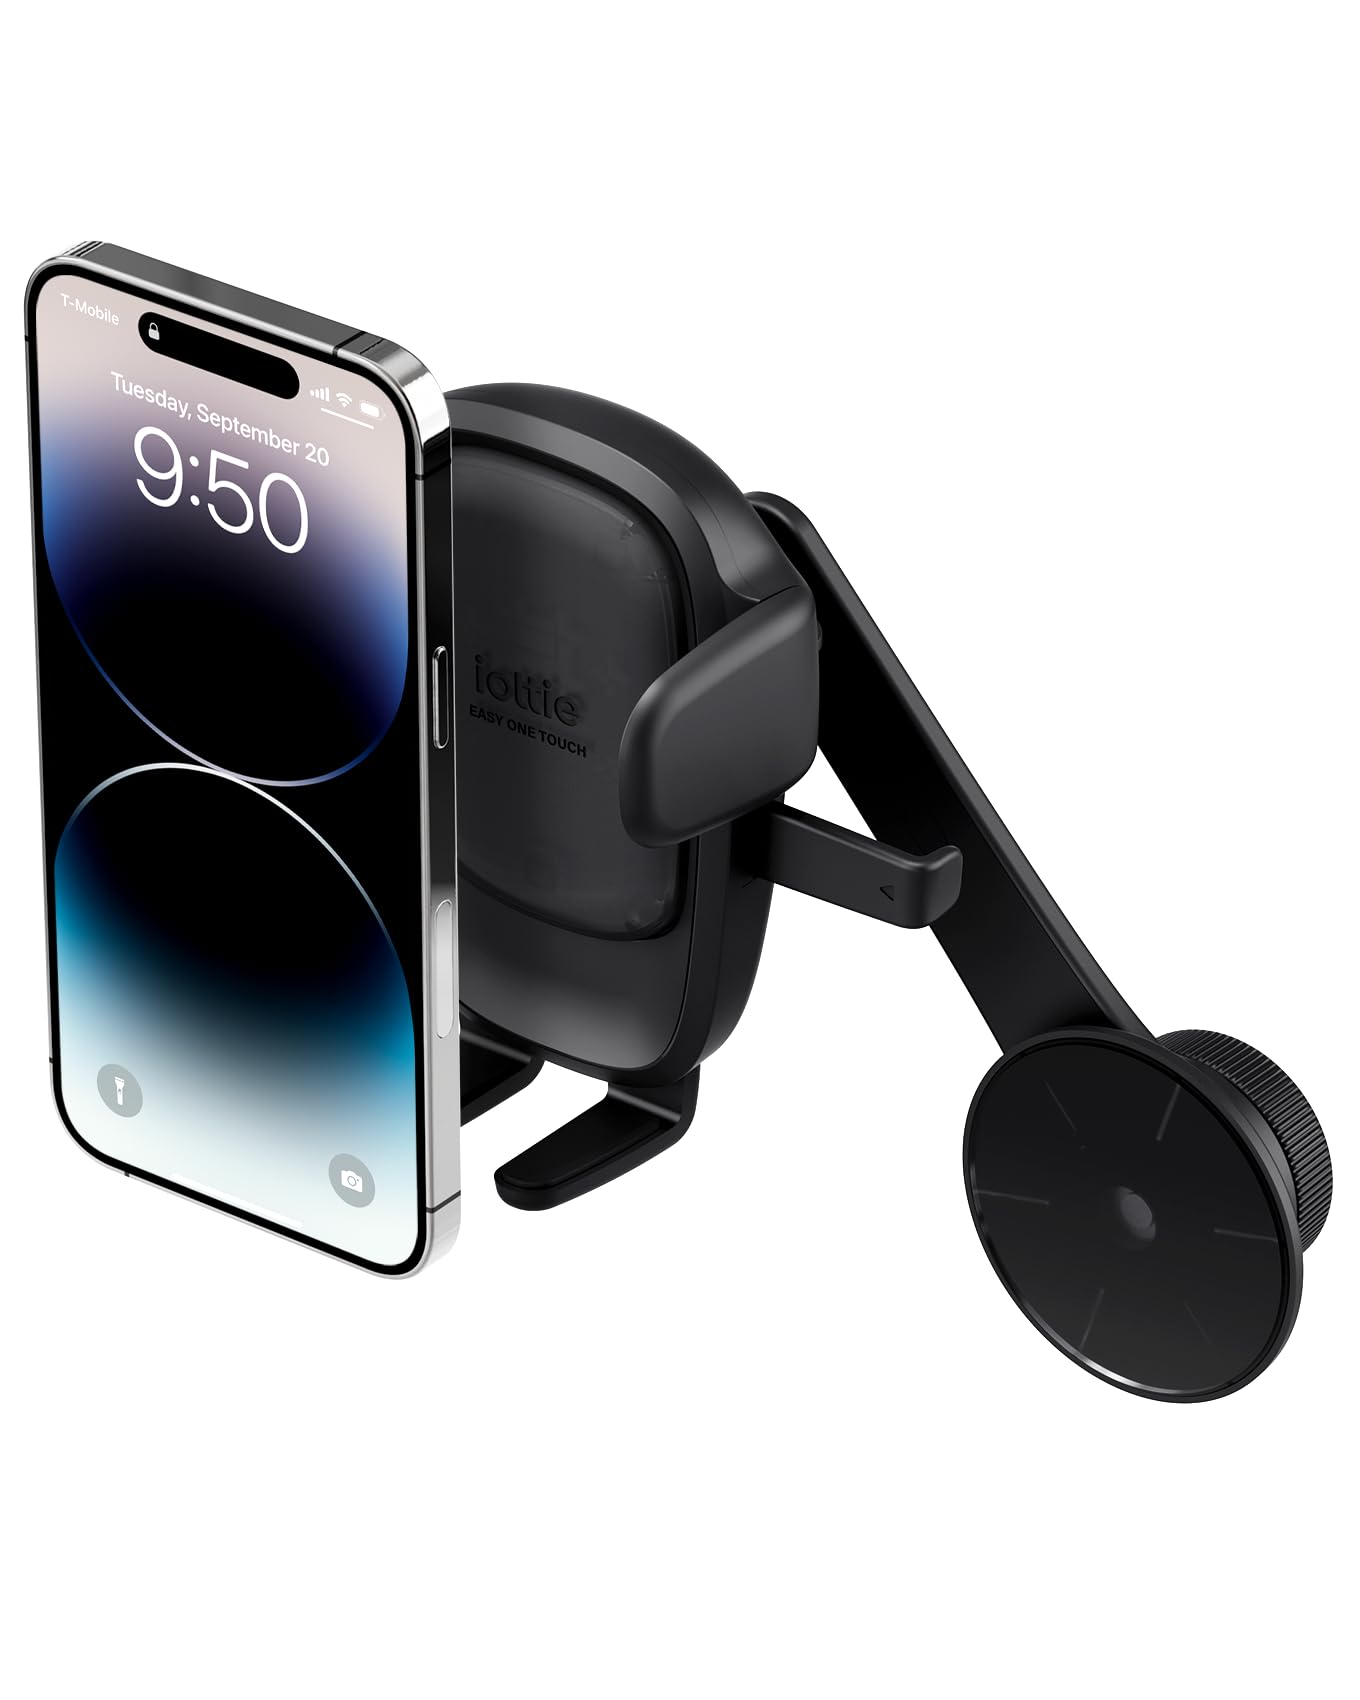 iOttie Easy One Touch 6 Vehicle Screen Car Phone Mount - Universal Cell Phone Holder for iPhone, Google, Samsung, Moto, Huawei, Nokia, LG, and All Other Smartphones